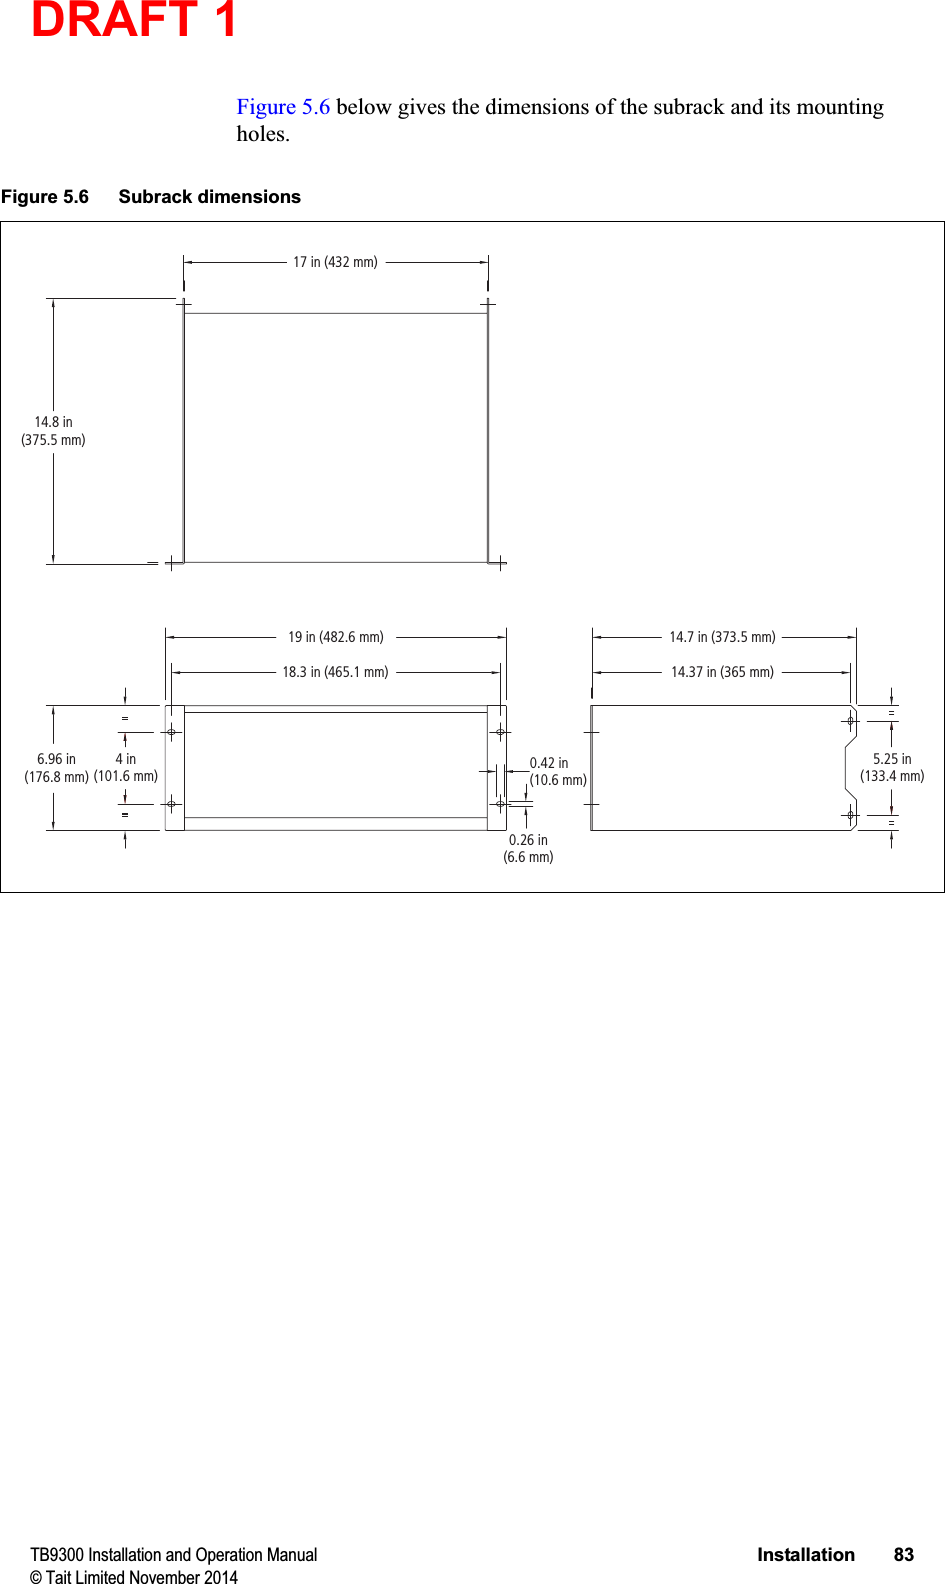 DRAFT 1 TB9300 Installation and Operation Manual Installation 83© Tait Limited November 2014Figure 5.6 below gives the dimensions of the subrack and its mounting holes.Figure 5.6 Subrack dimensions5.25 in(133.4 mm)4 in(101.6 mm)6.96 in(176.8 mm)14.8 in(375.5 mm)19 in (482.6 mm)17 in (432 mm)18.3 in (465.1 mm)0.26 in(6.6 mm)0.42 in(10.6 mm)14.7 in (373.5 mm)14.37 in (365 mm)